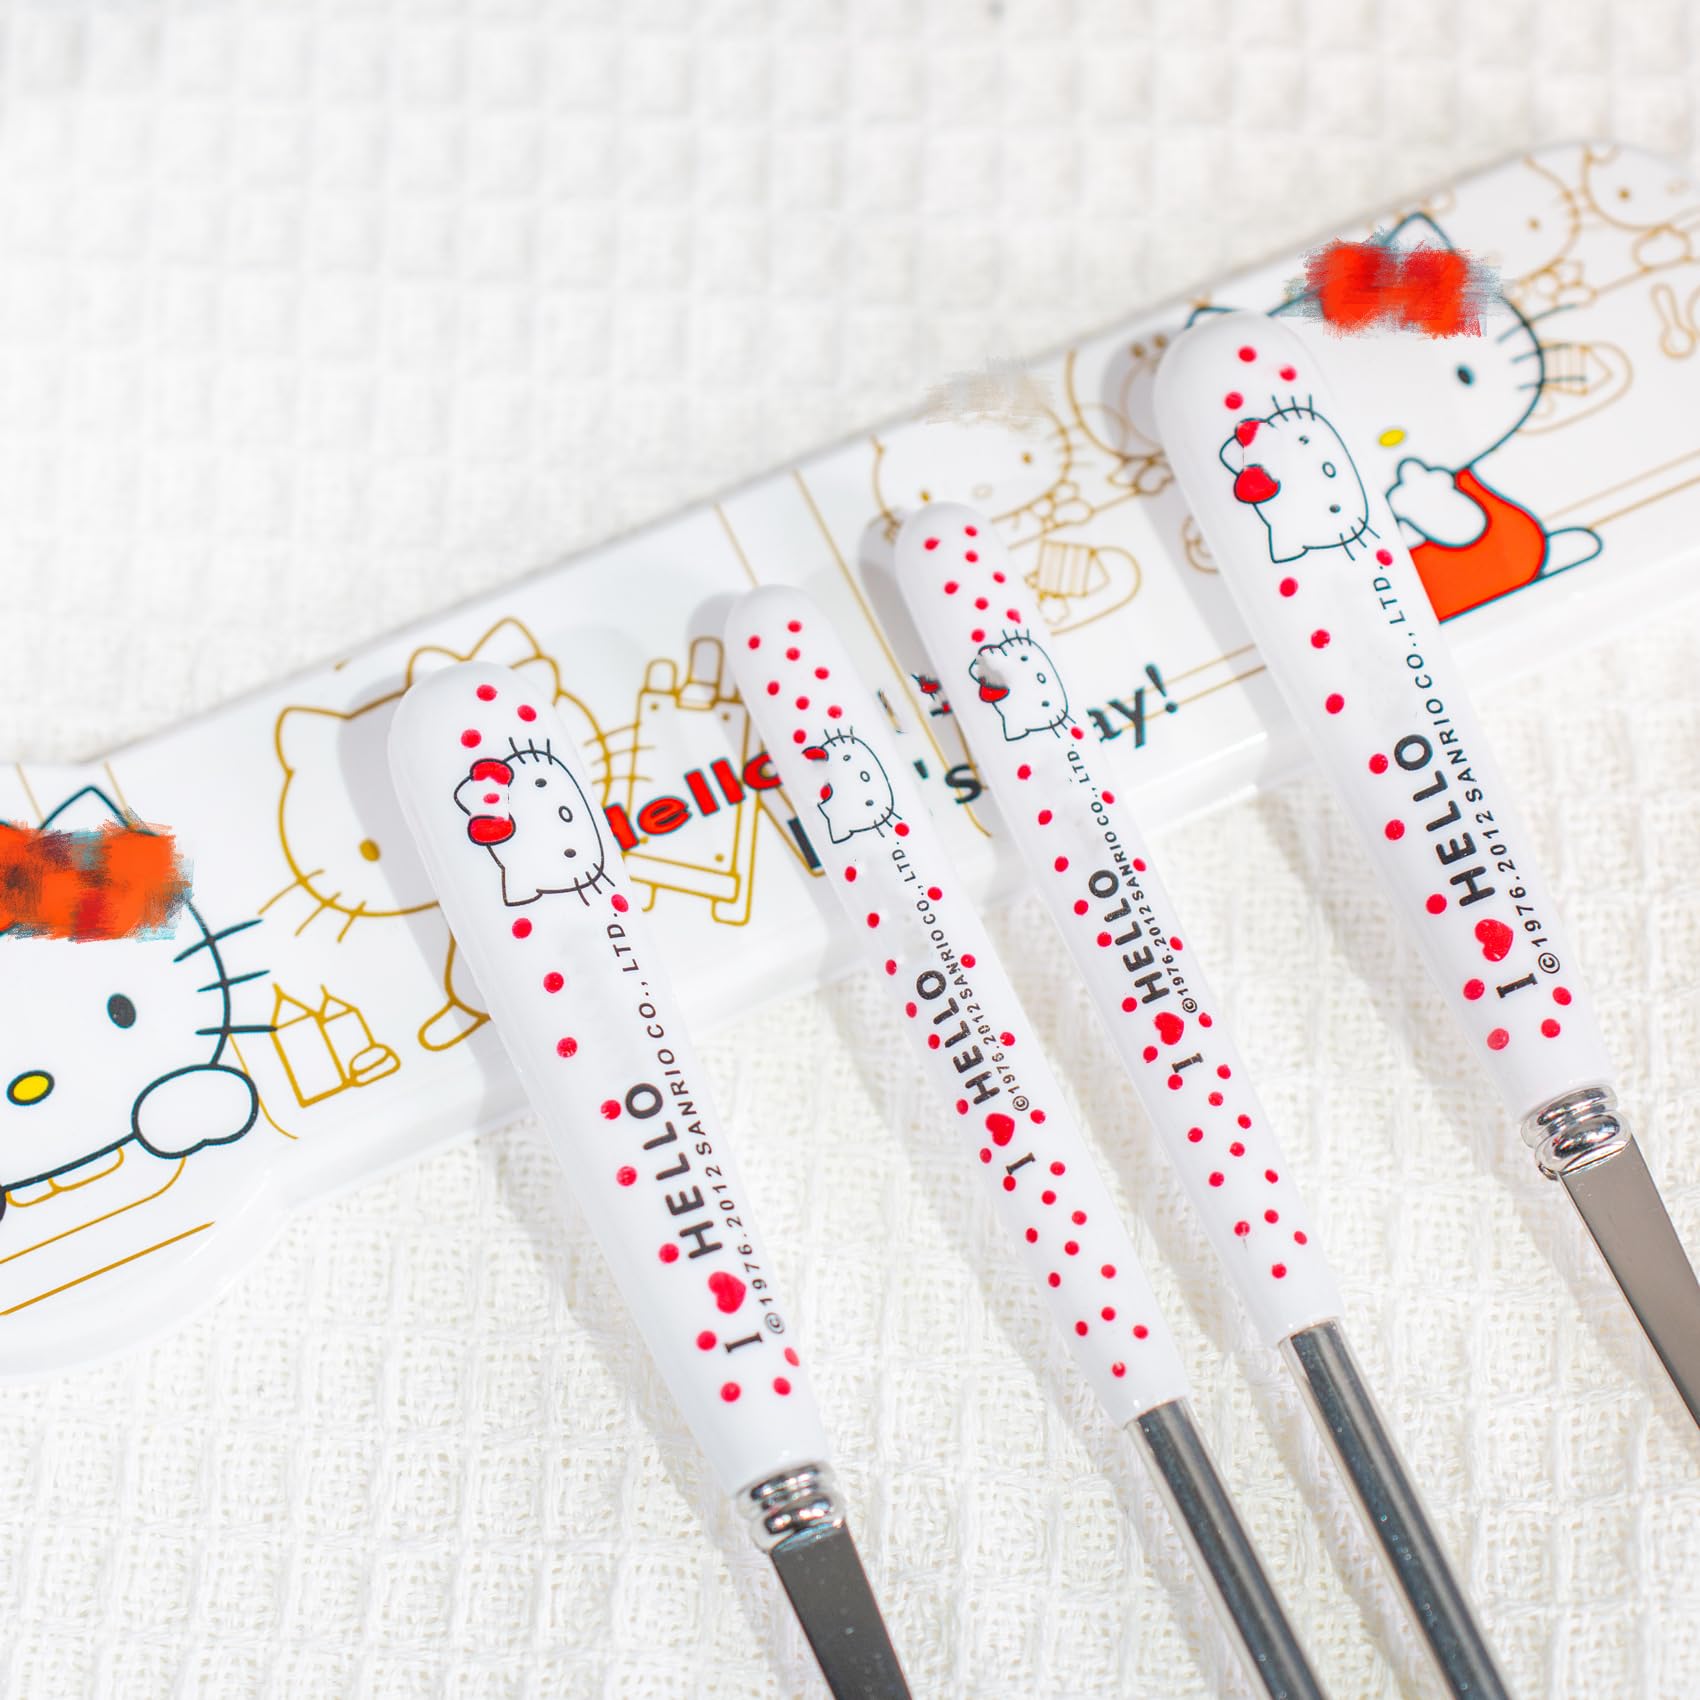 oneZHI Cartoon Kitty Utensils Set Includes Reusable Stainless Steel Fork Spoon Chopsticks And Cute Cat Carrying Case Durable